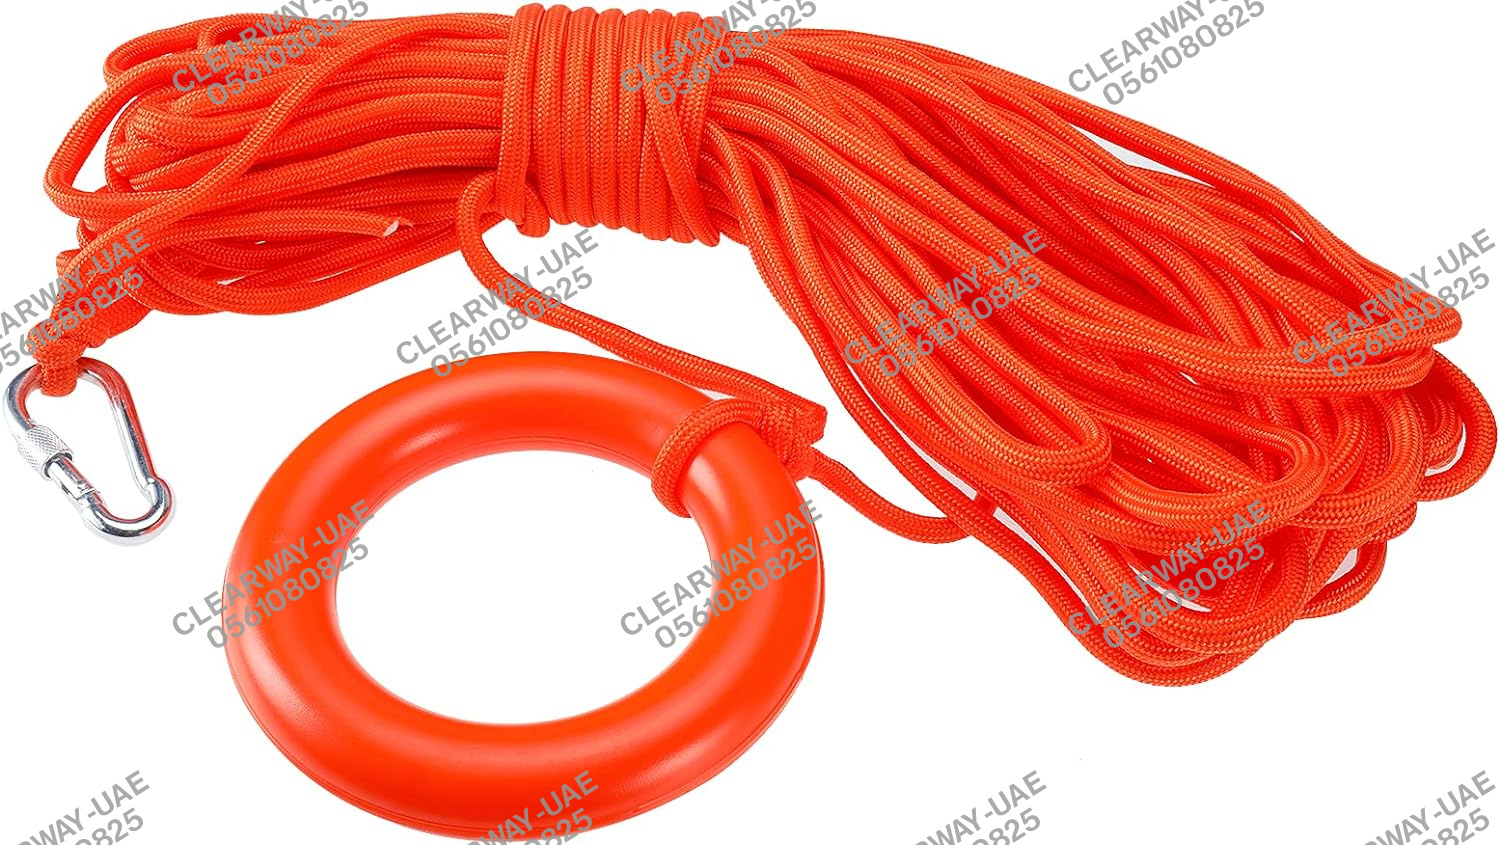 FLOATING LIFE SAVING ROPE SUPPLIER IN ABUDHABI UAE CLEARWAY RYXO SAFETY12